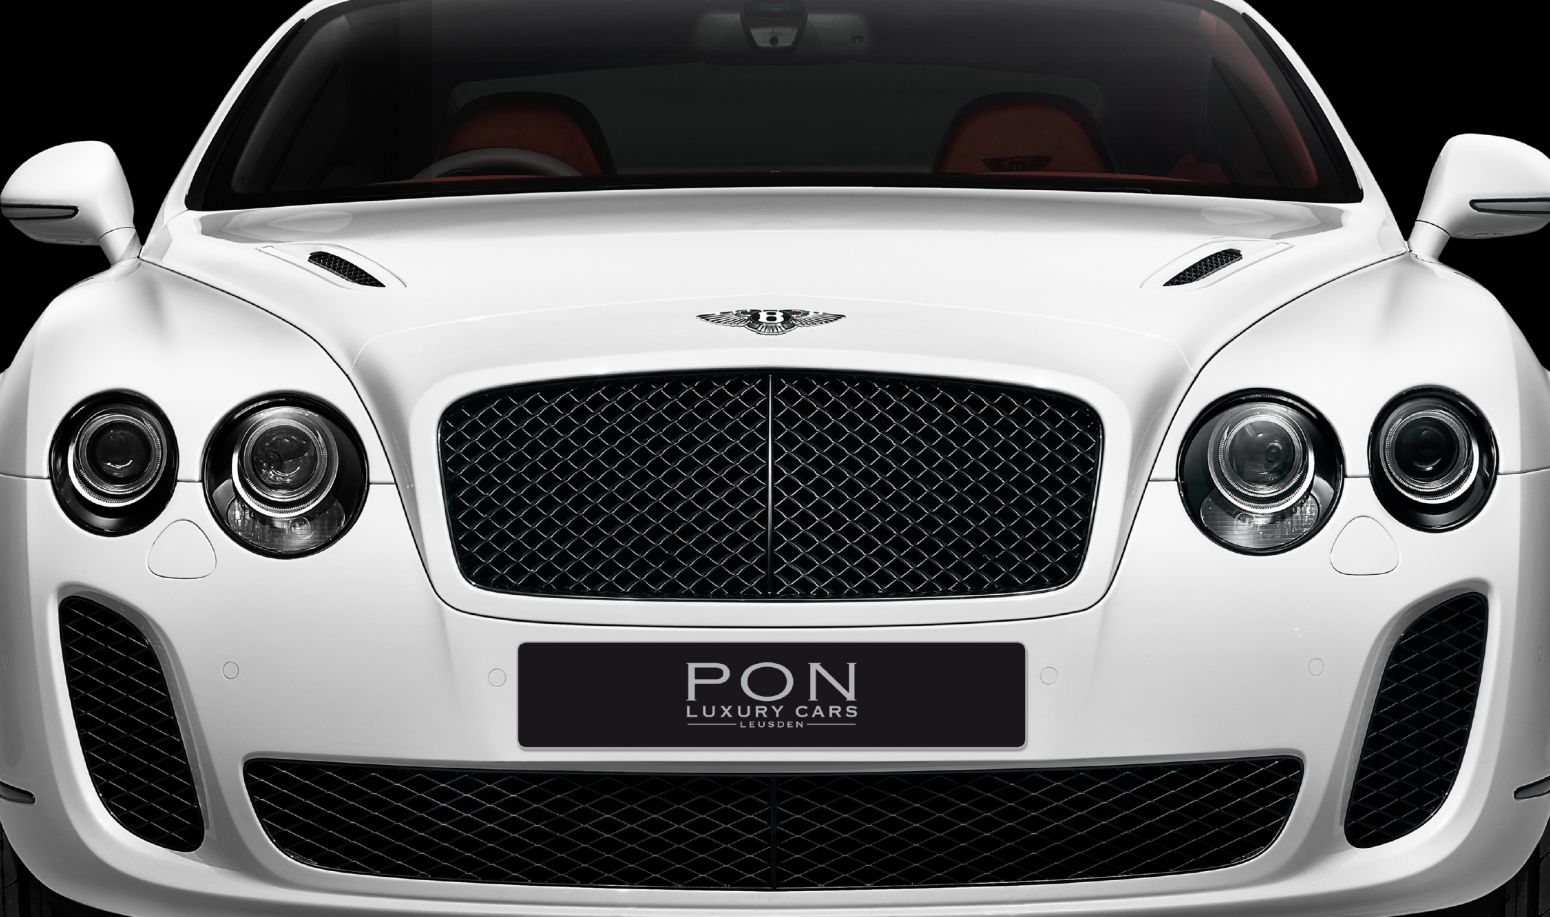 Pon Luxury Cars - AGH & Friends